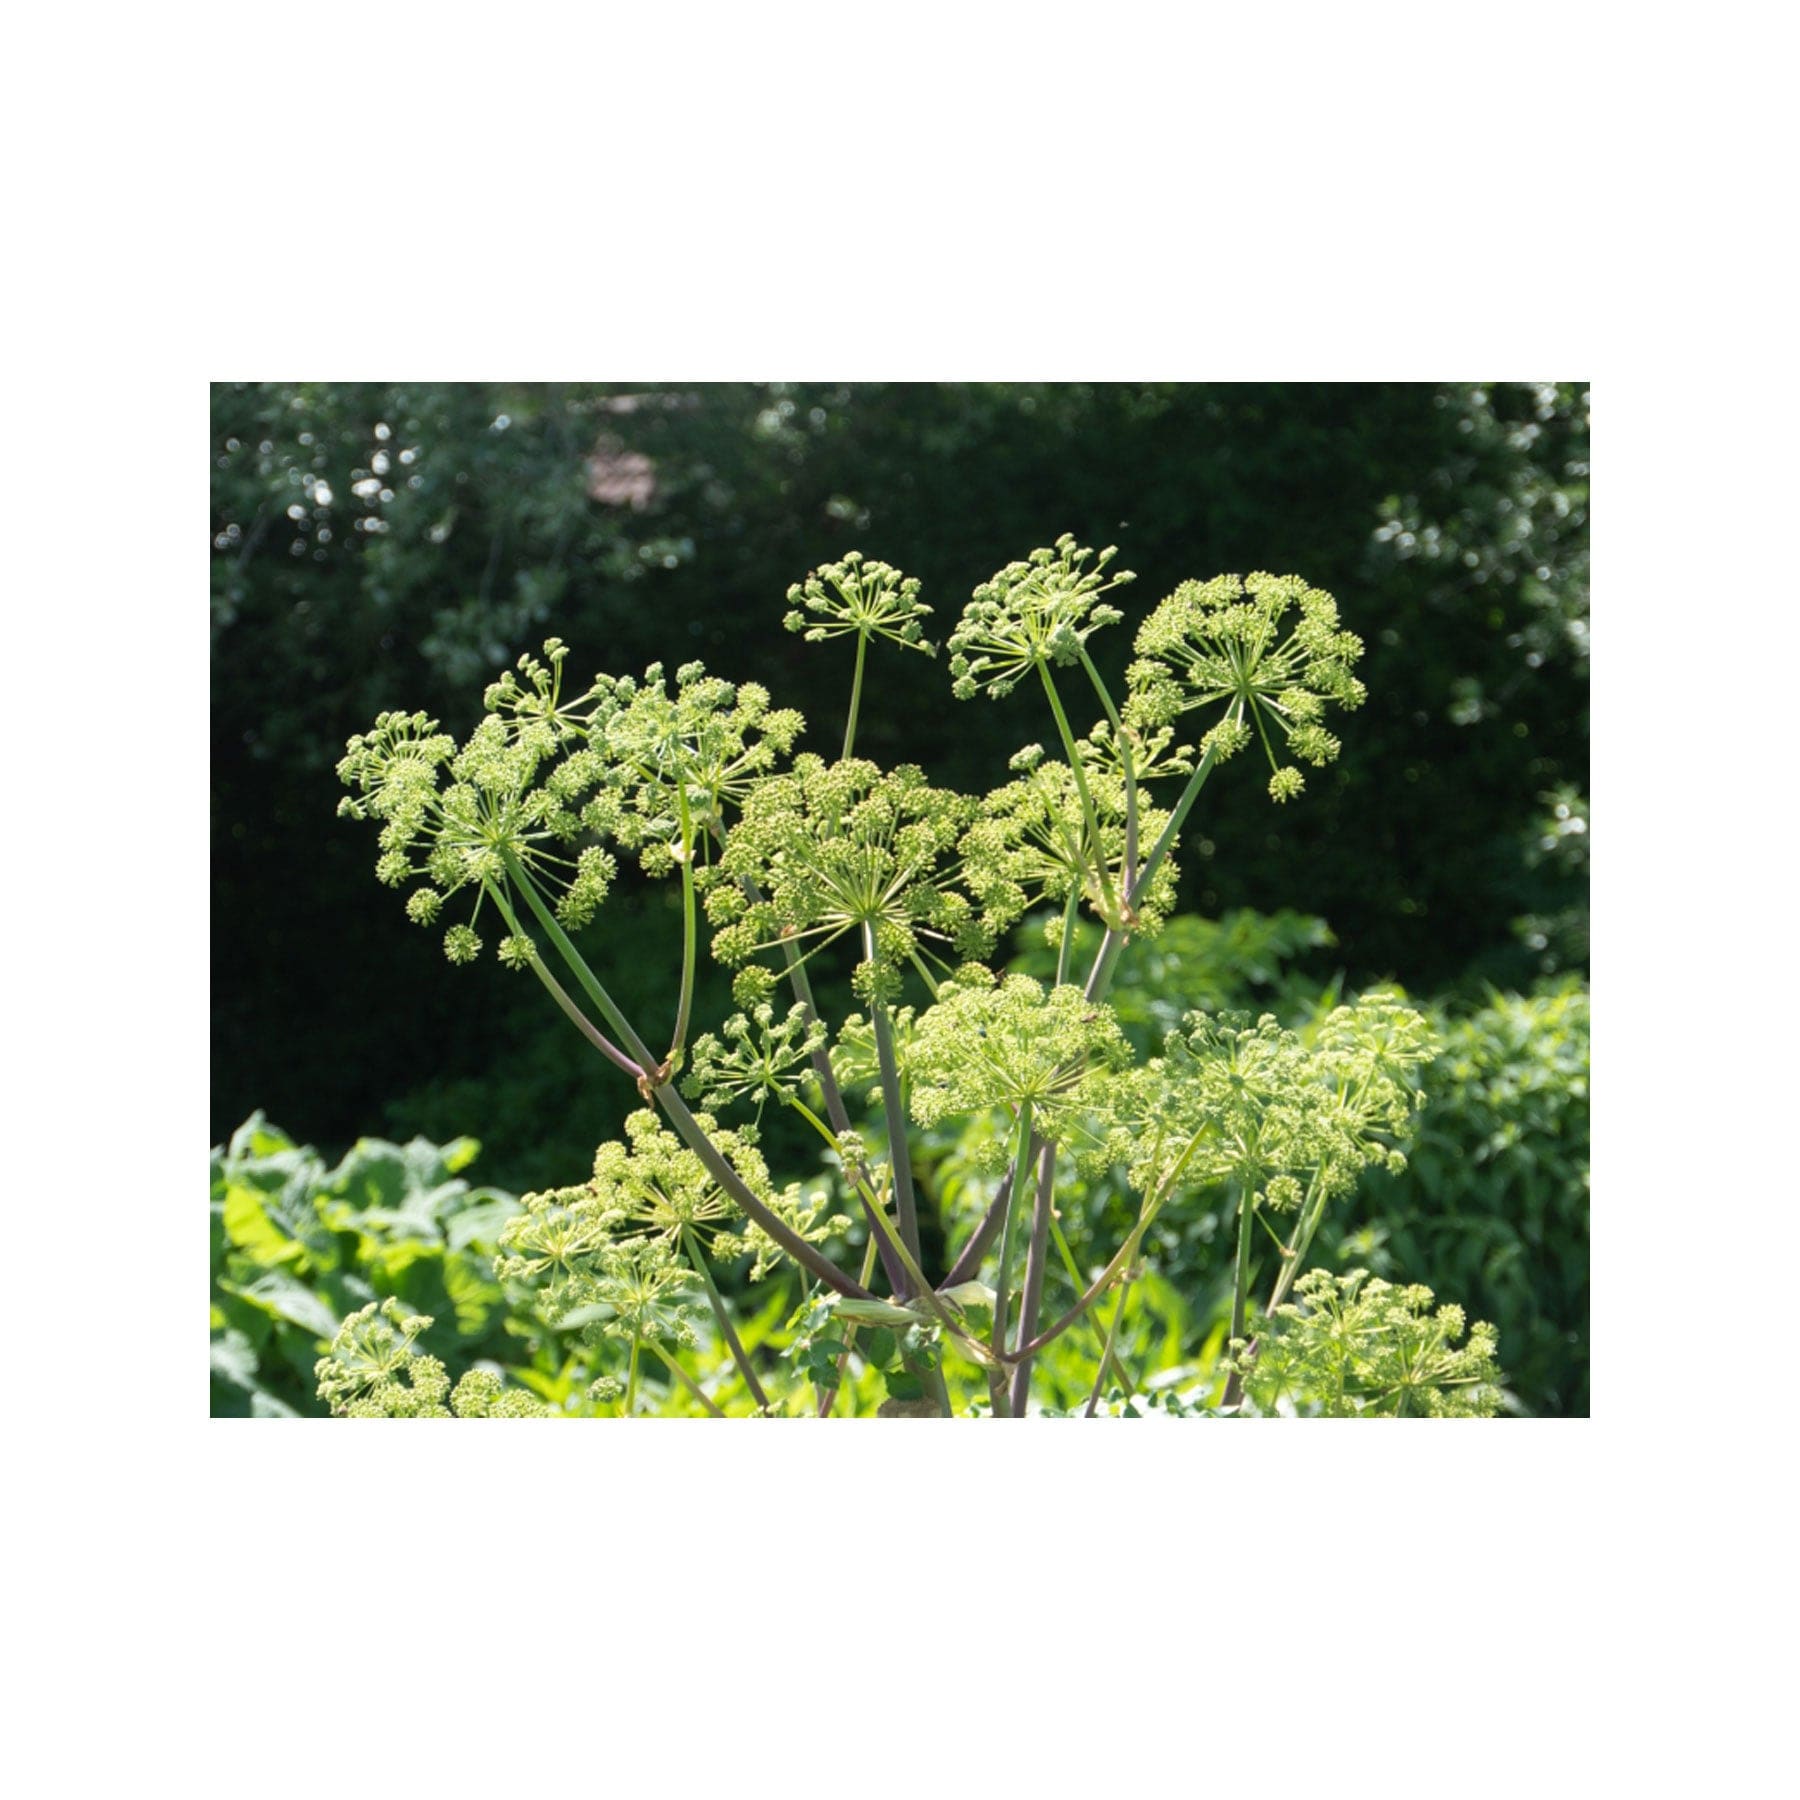 Angelica seed pack